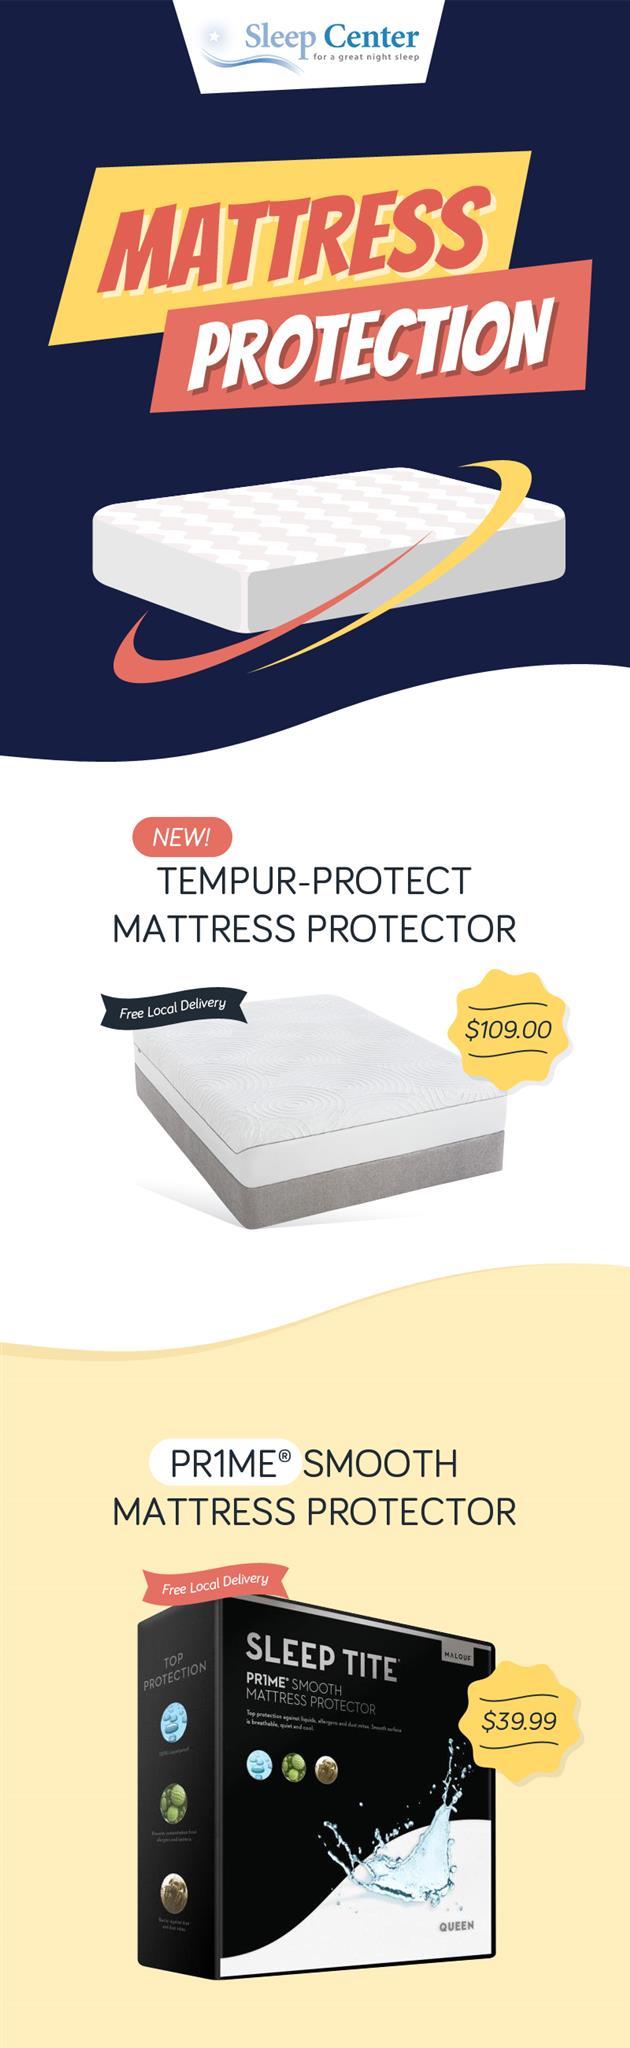 Purchase Quality Mattress Protector in Sacramento from Sleep Center